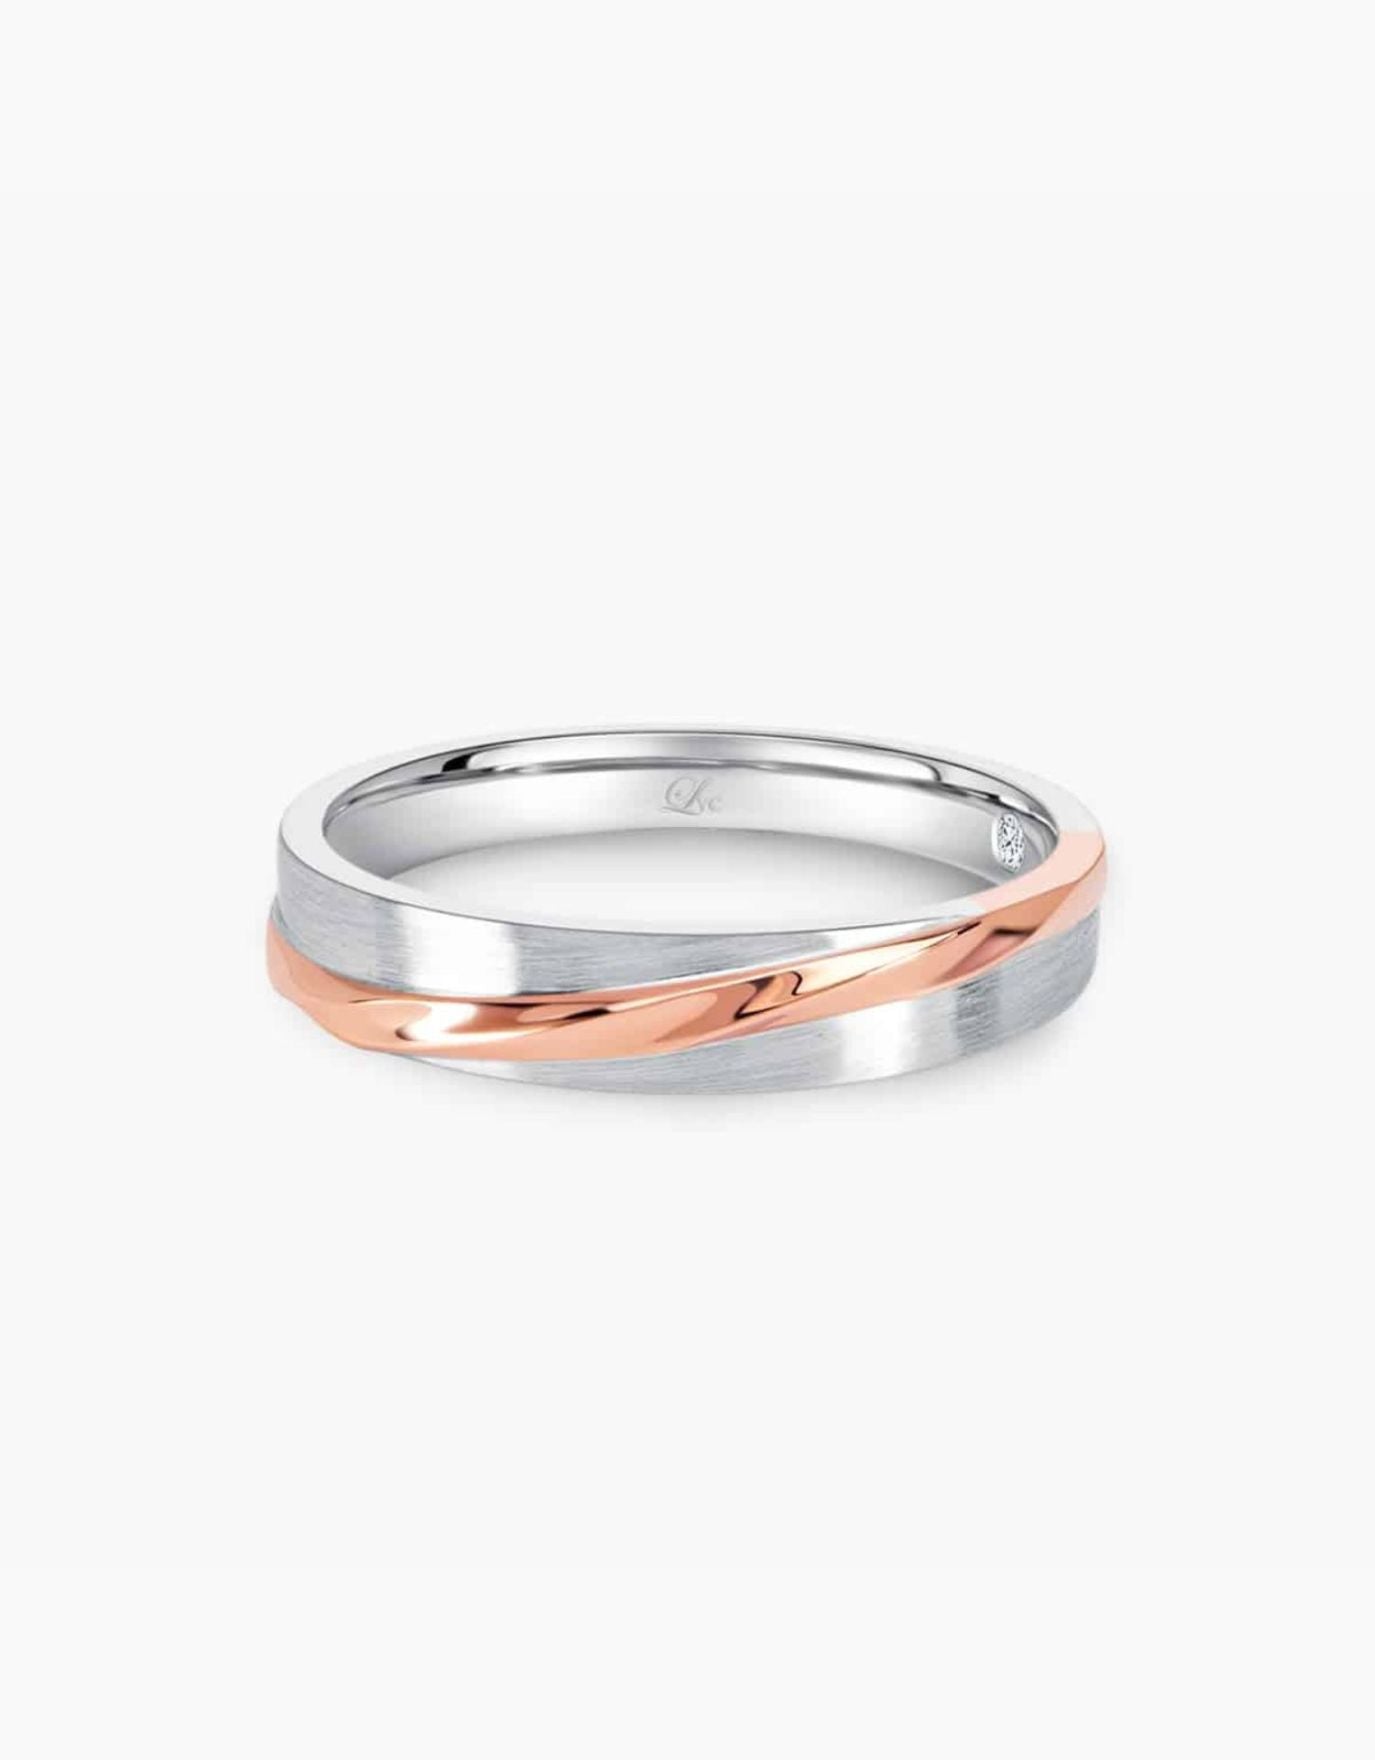 LVC Desirio Allure Wedding Band in White and Rose Gold with a Glossy Finish